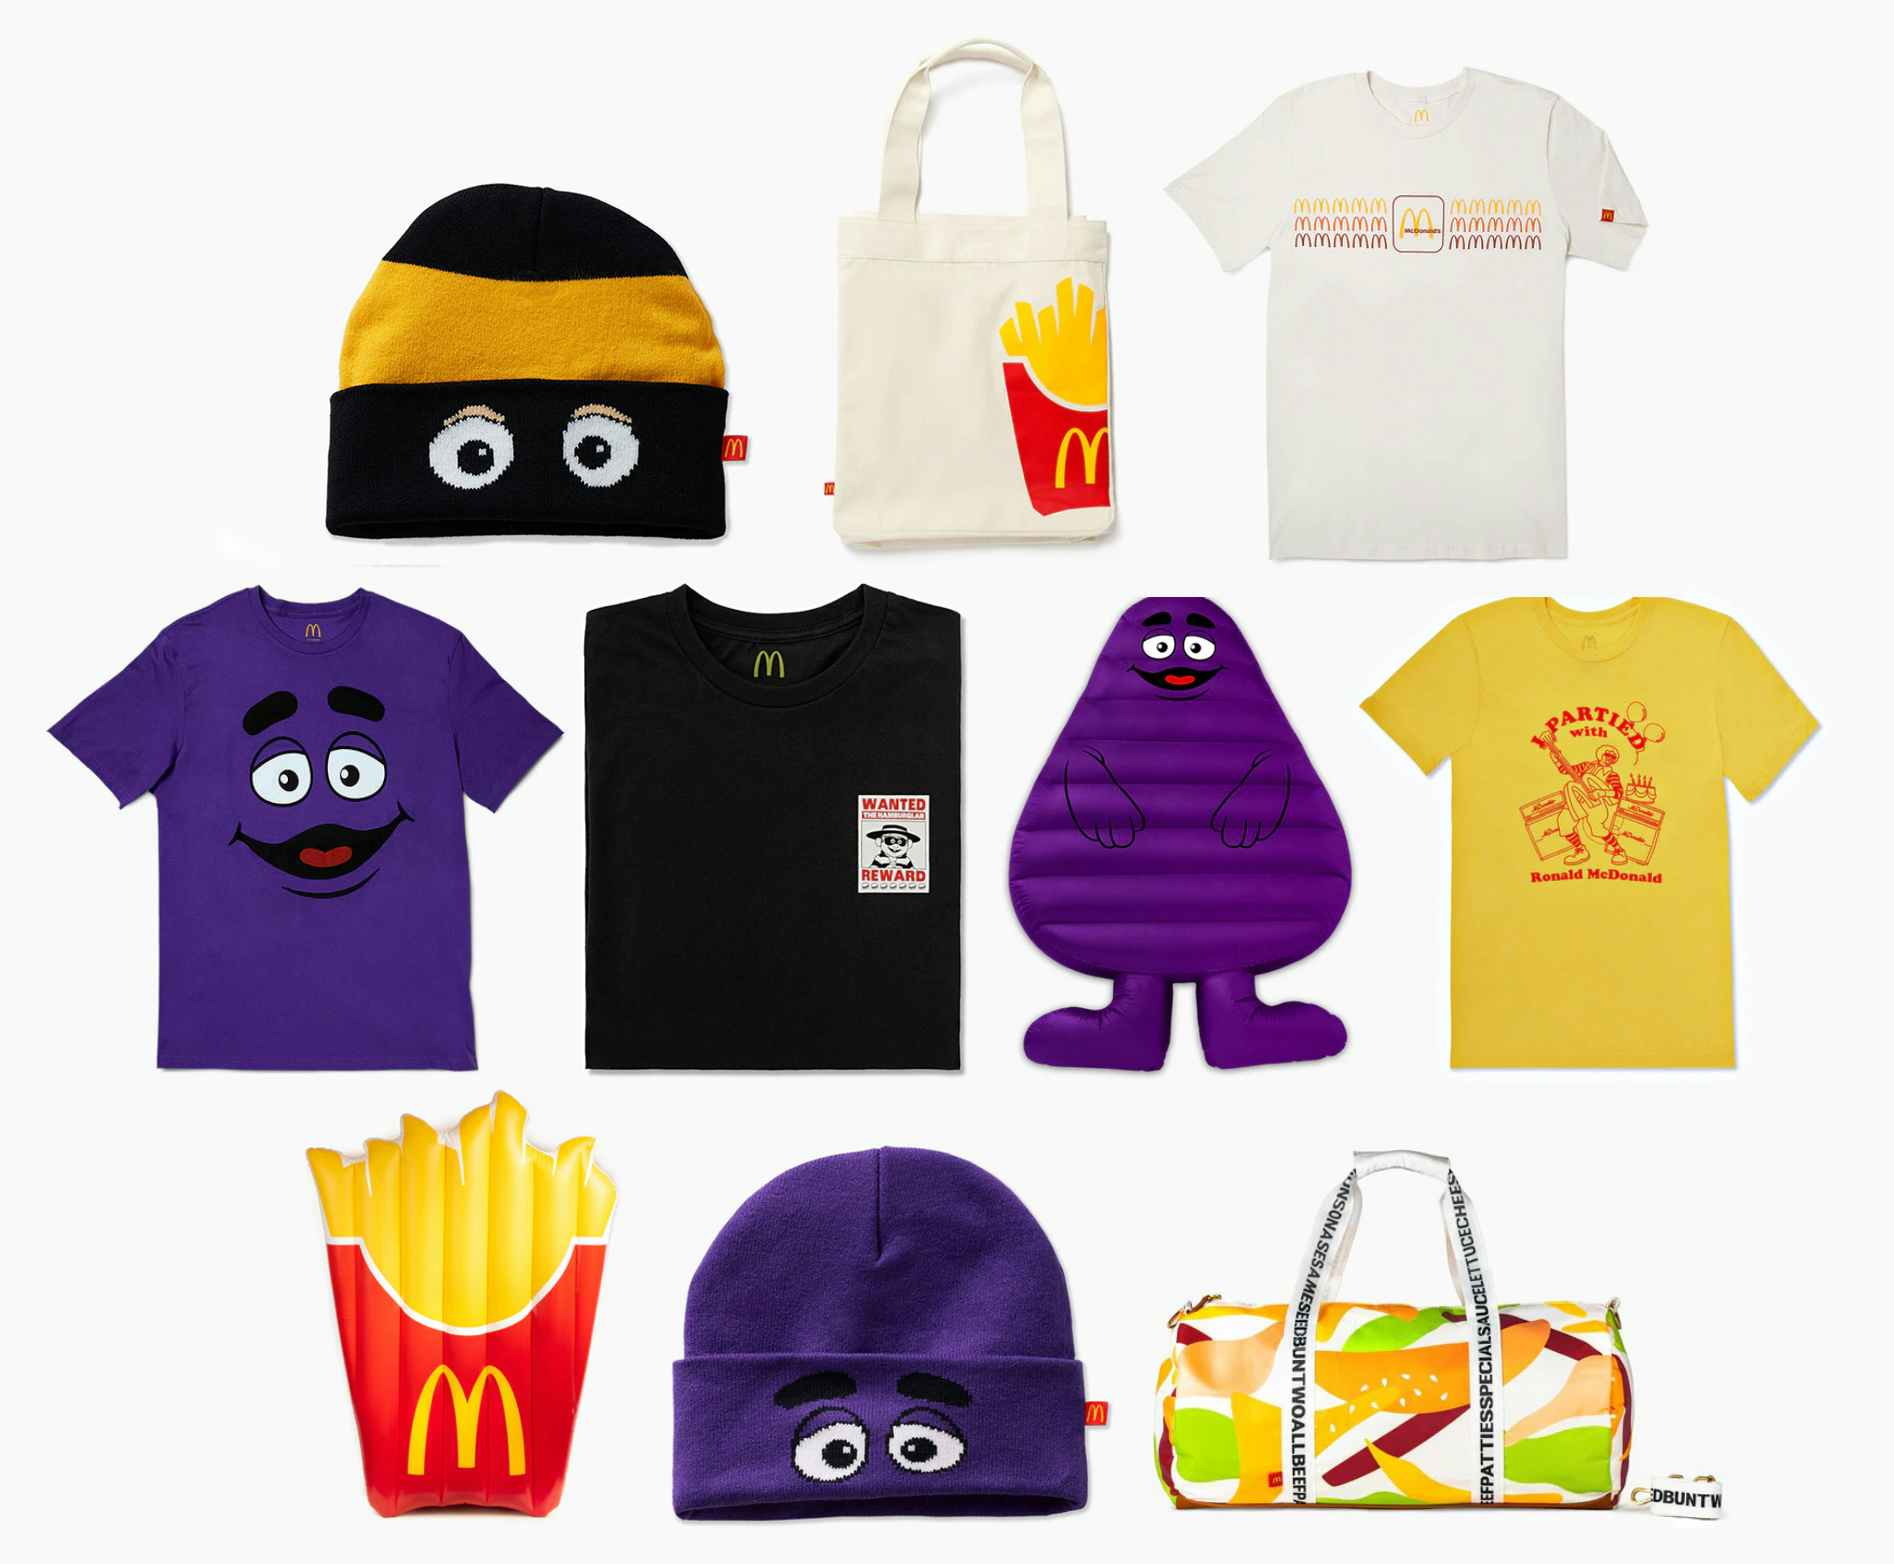 mcdonalds merch with shirts, beanies, totes, pool floaties, and a duffel bag